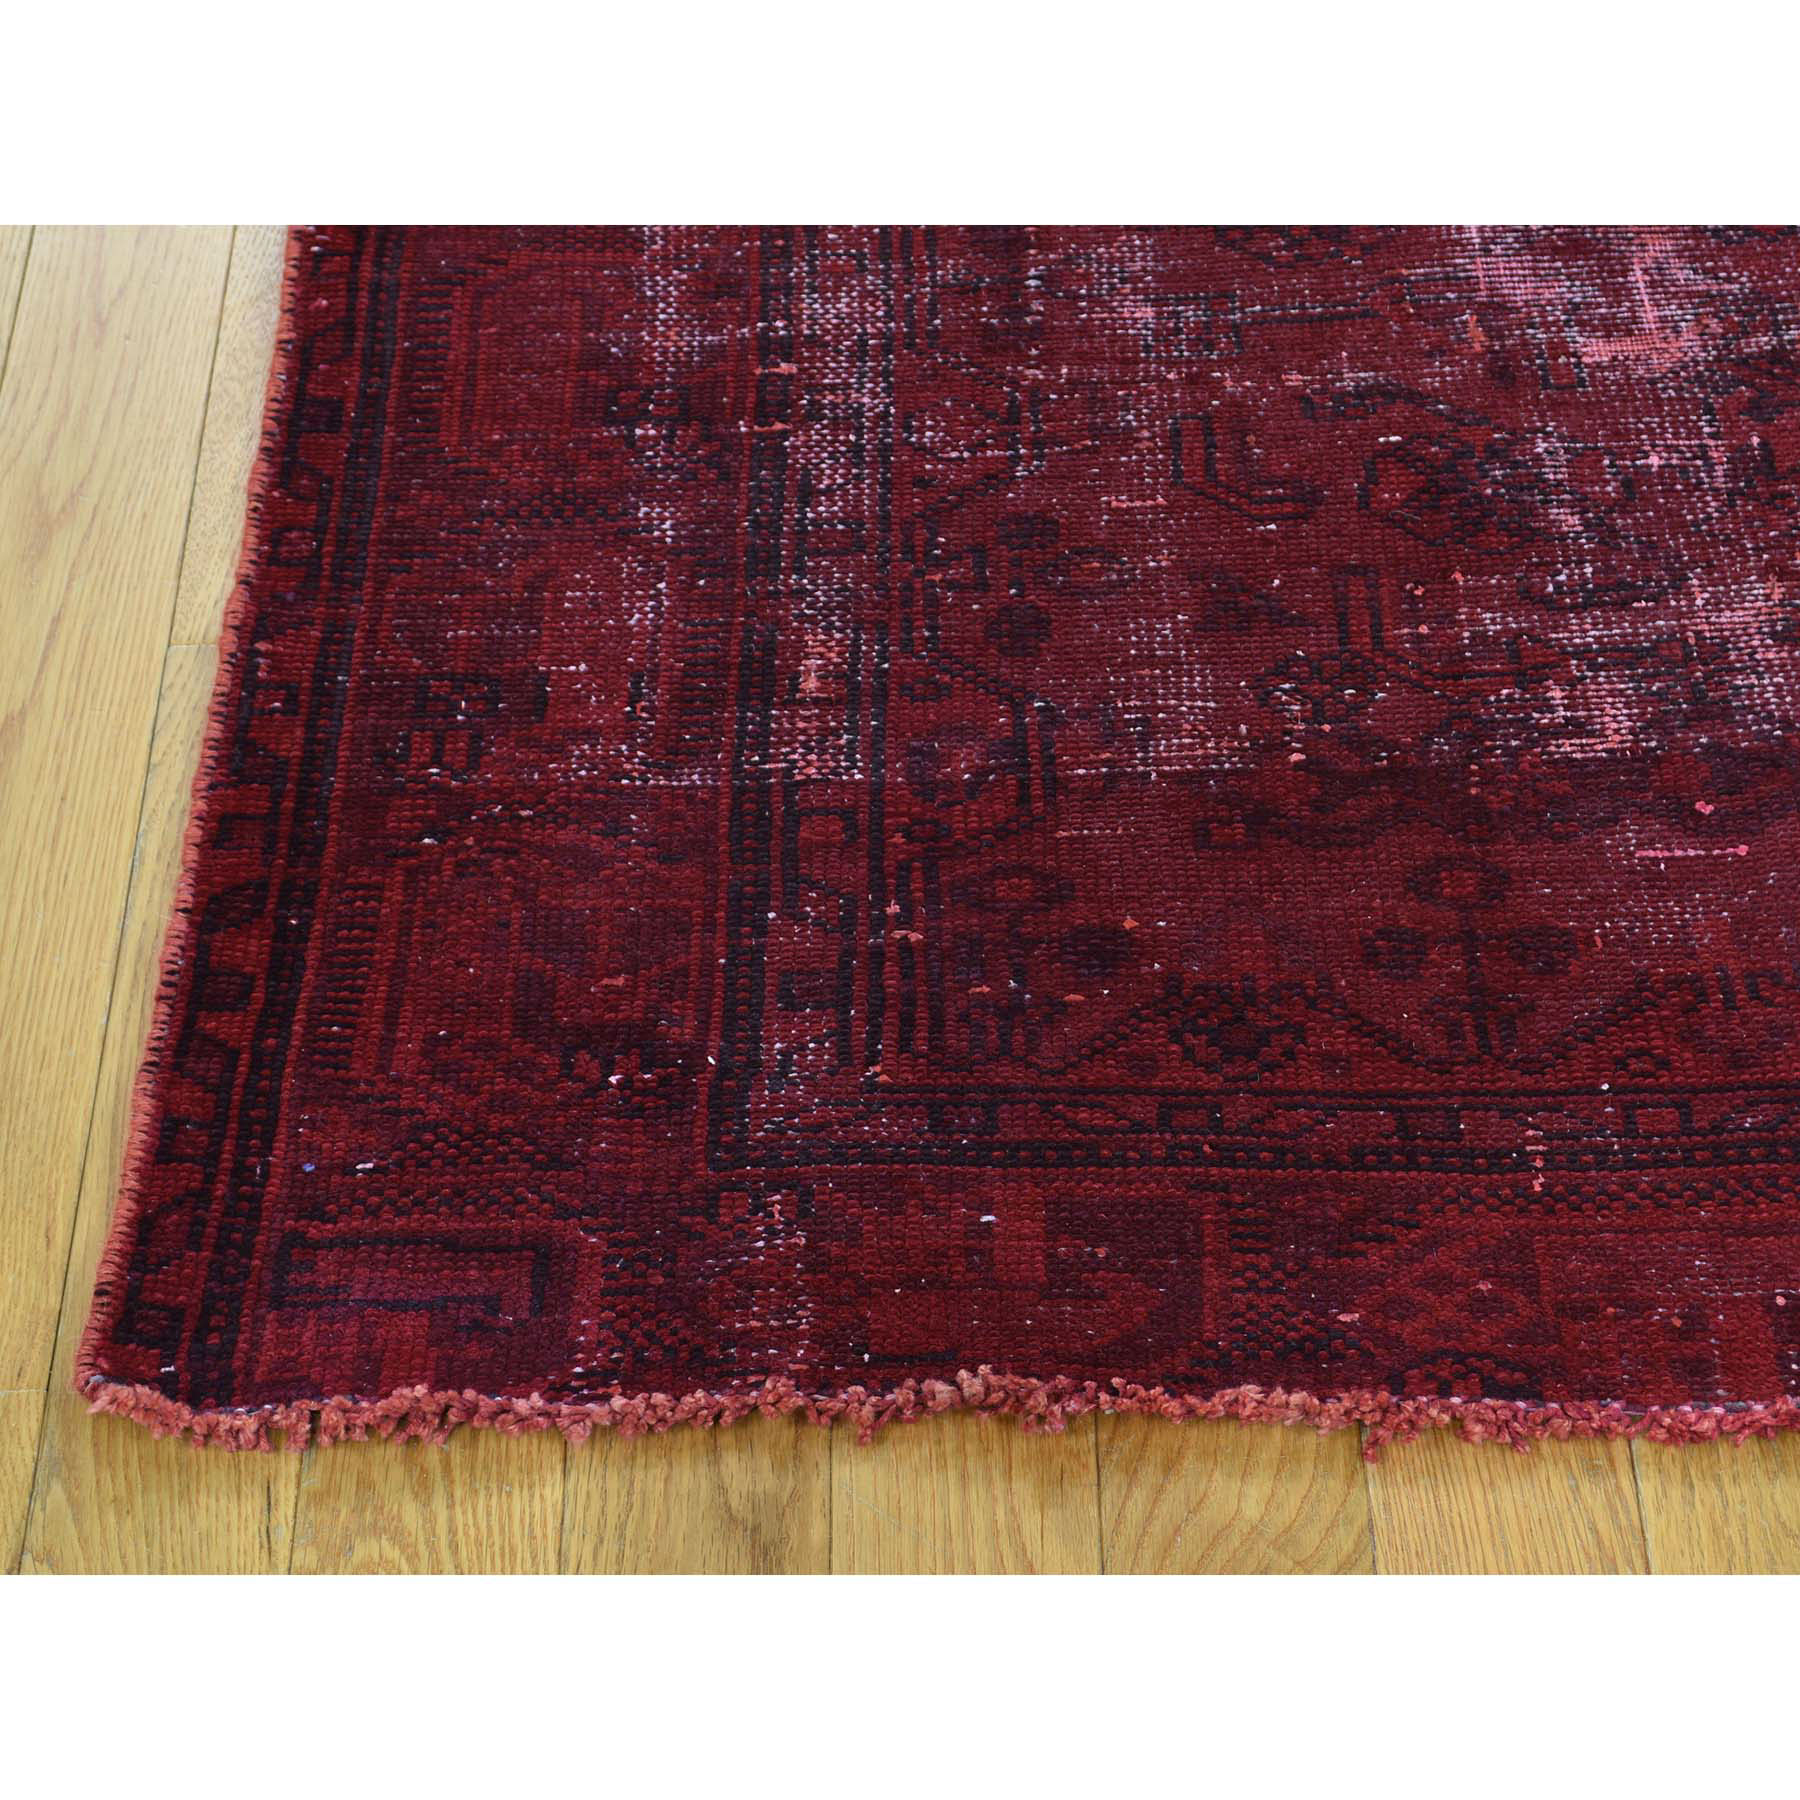 4-1 x7-6  Hand-Knotted Overdyed Persian Hamadan Worn Wide Runner Rug 